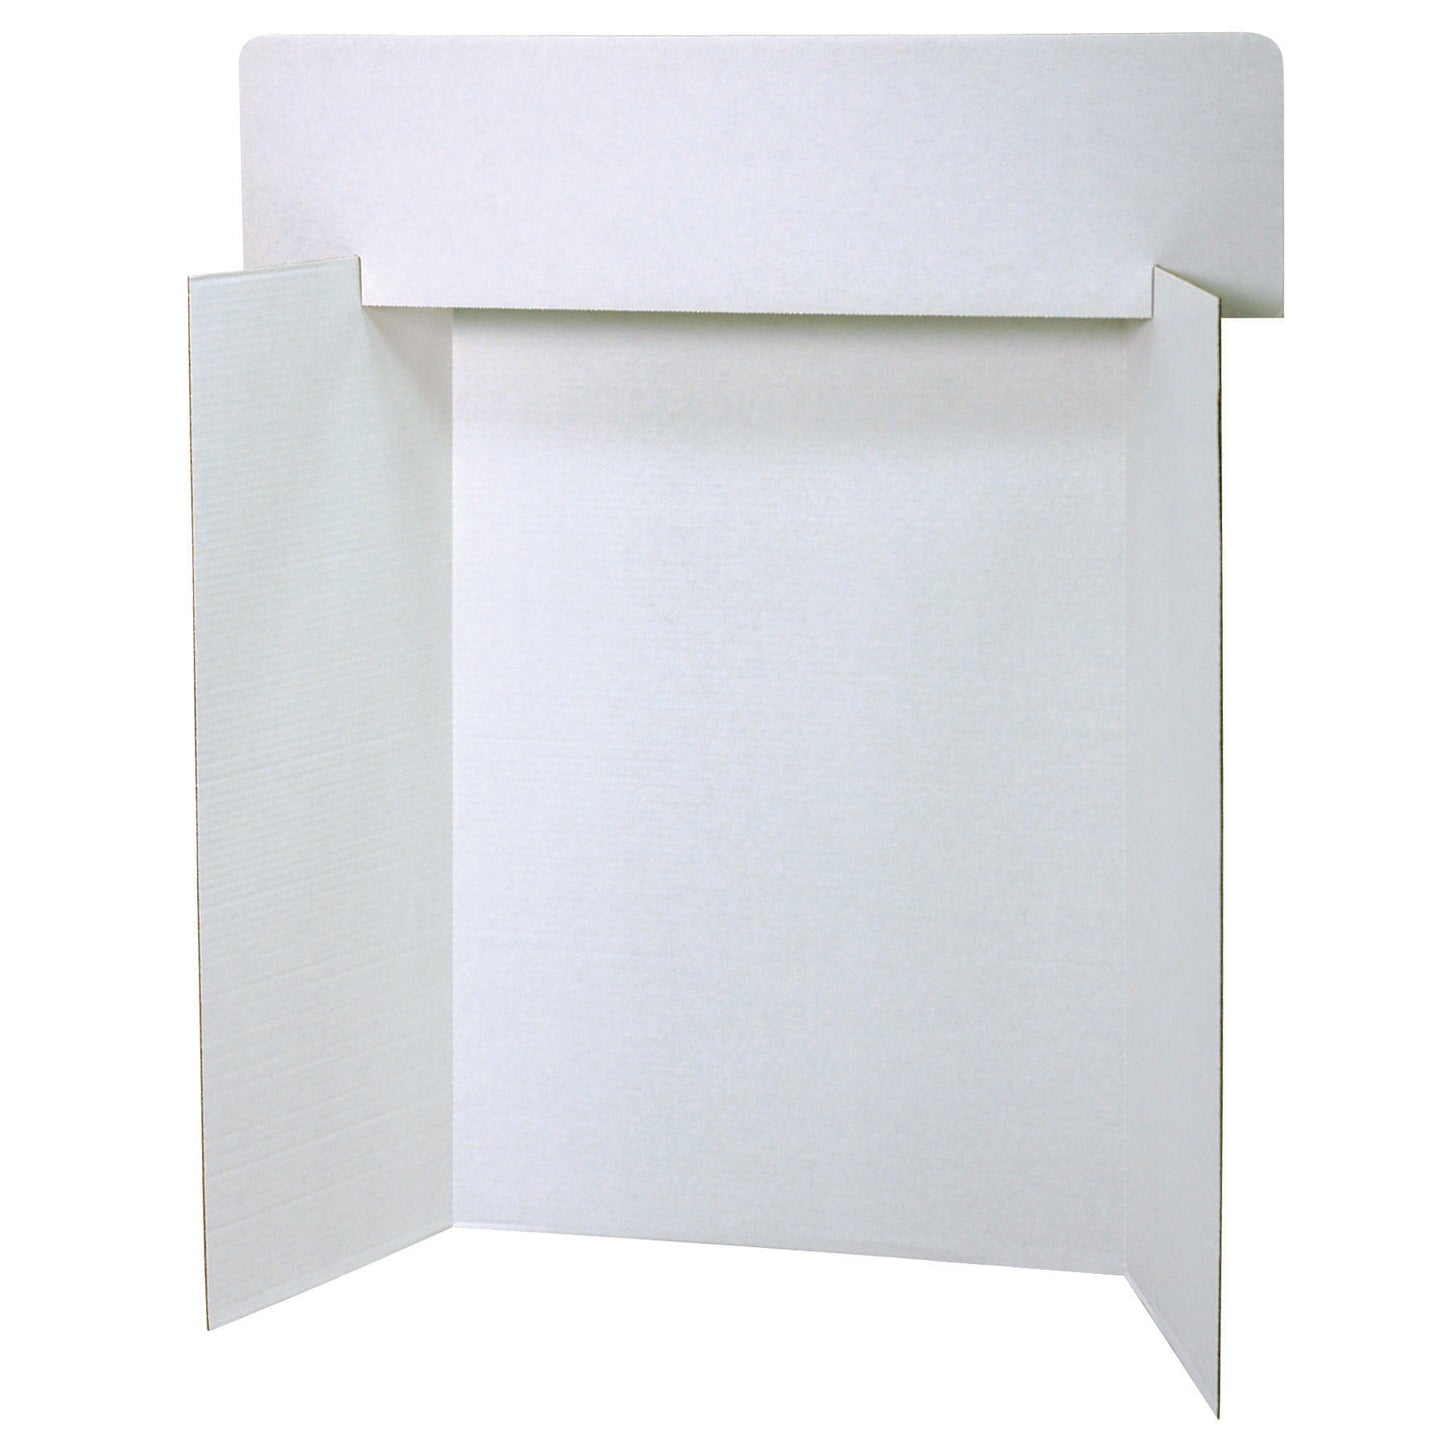 Presentation Board Headers, White, 36" x 9.5", Pack of 12 Boards